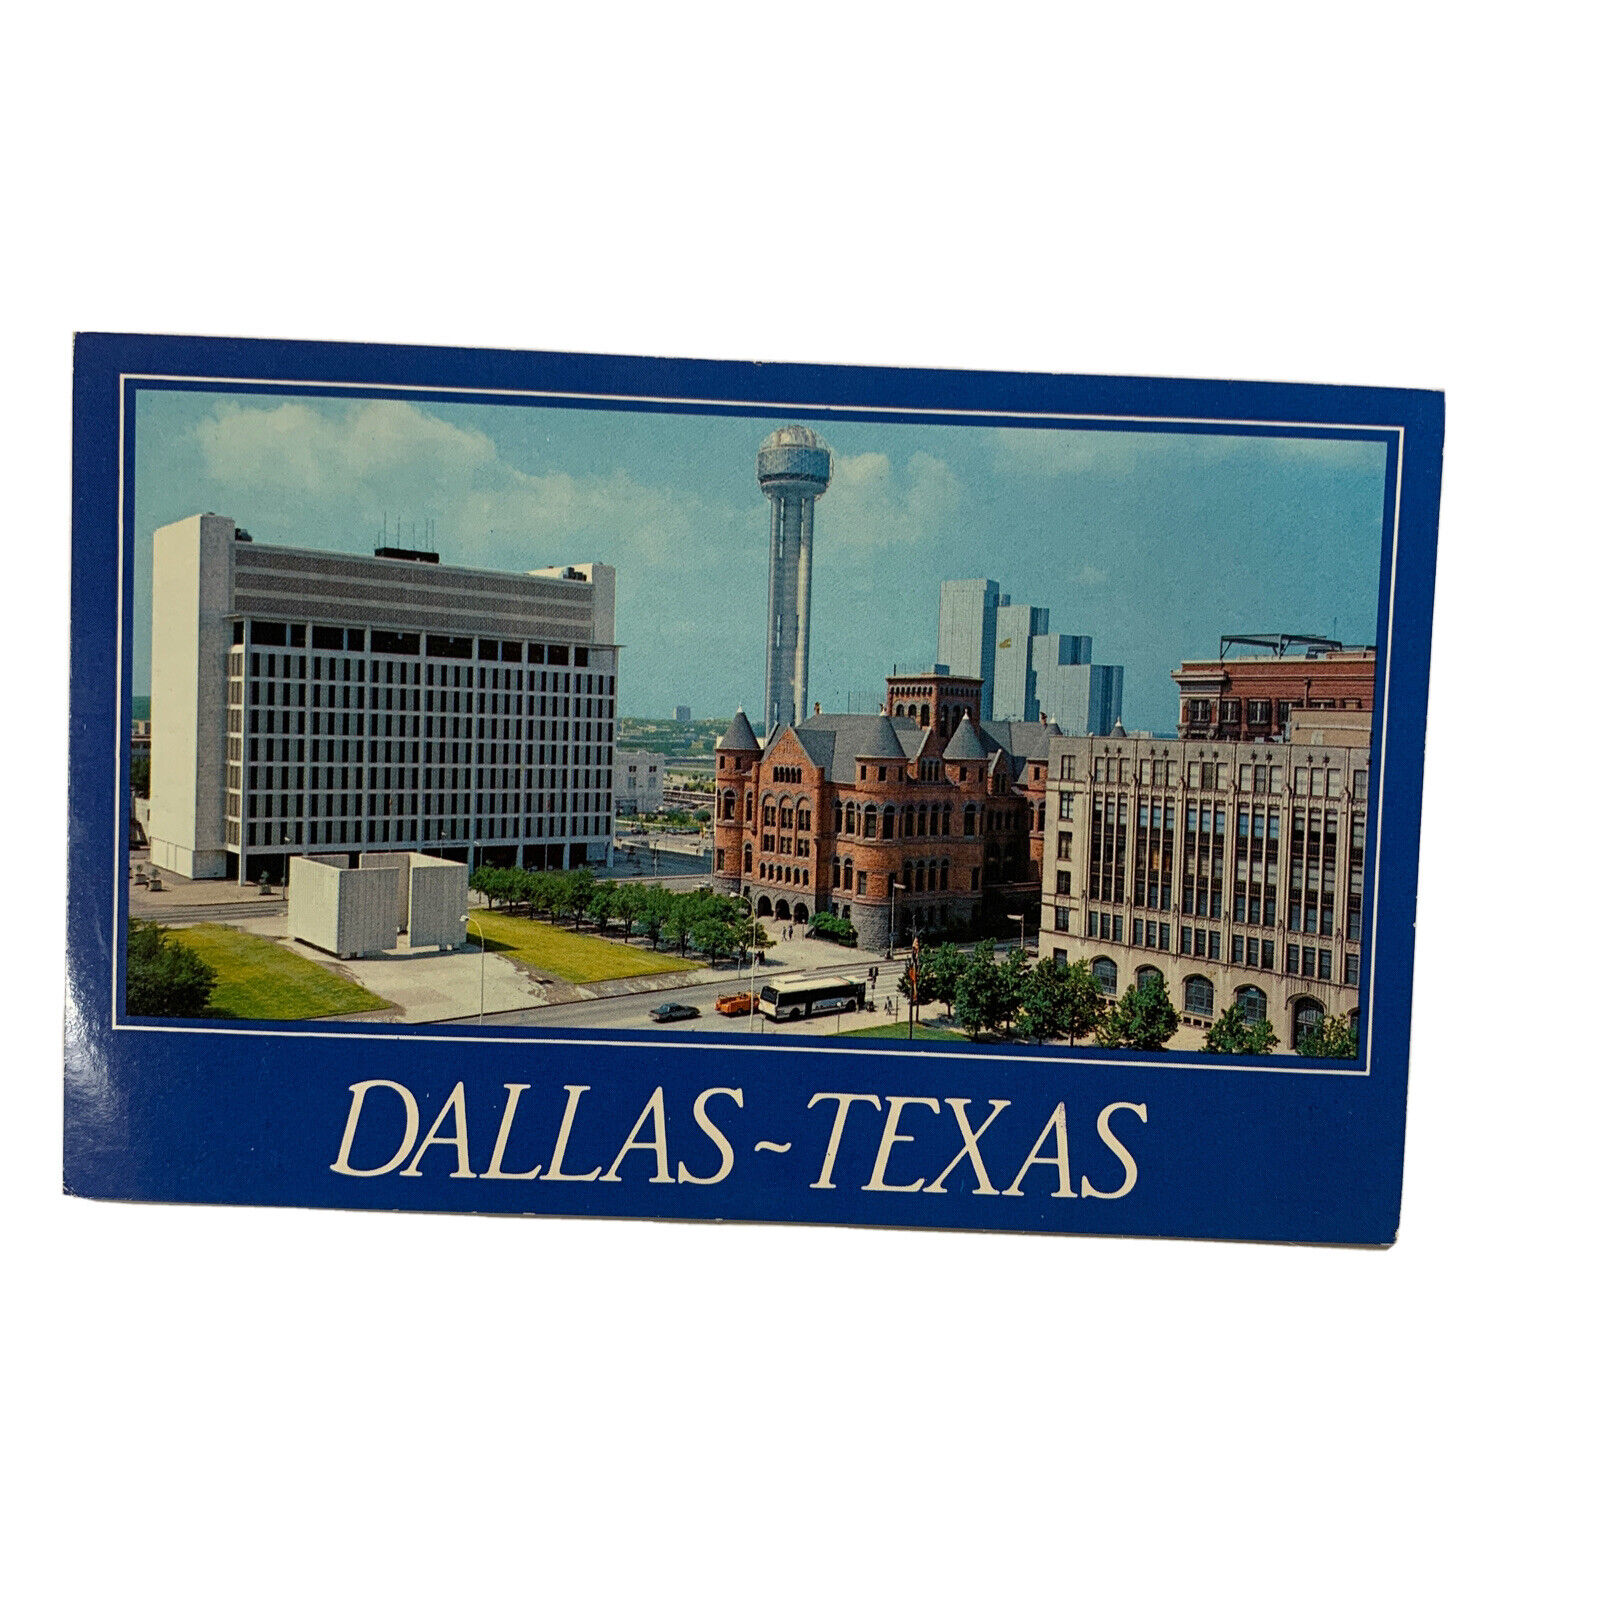 Dallas Texas Kennedy Plaza Postcard Records Building Reunion Tower Courthouse